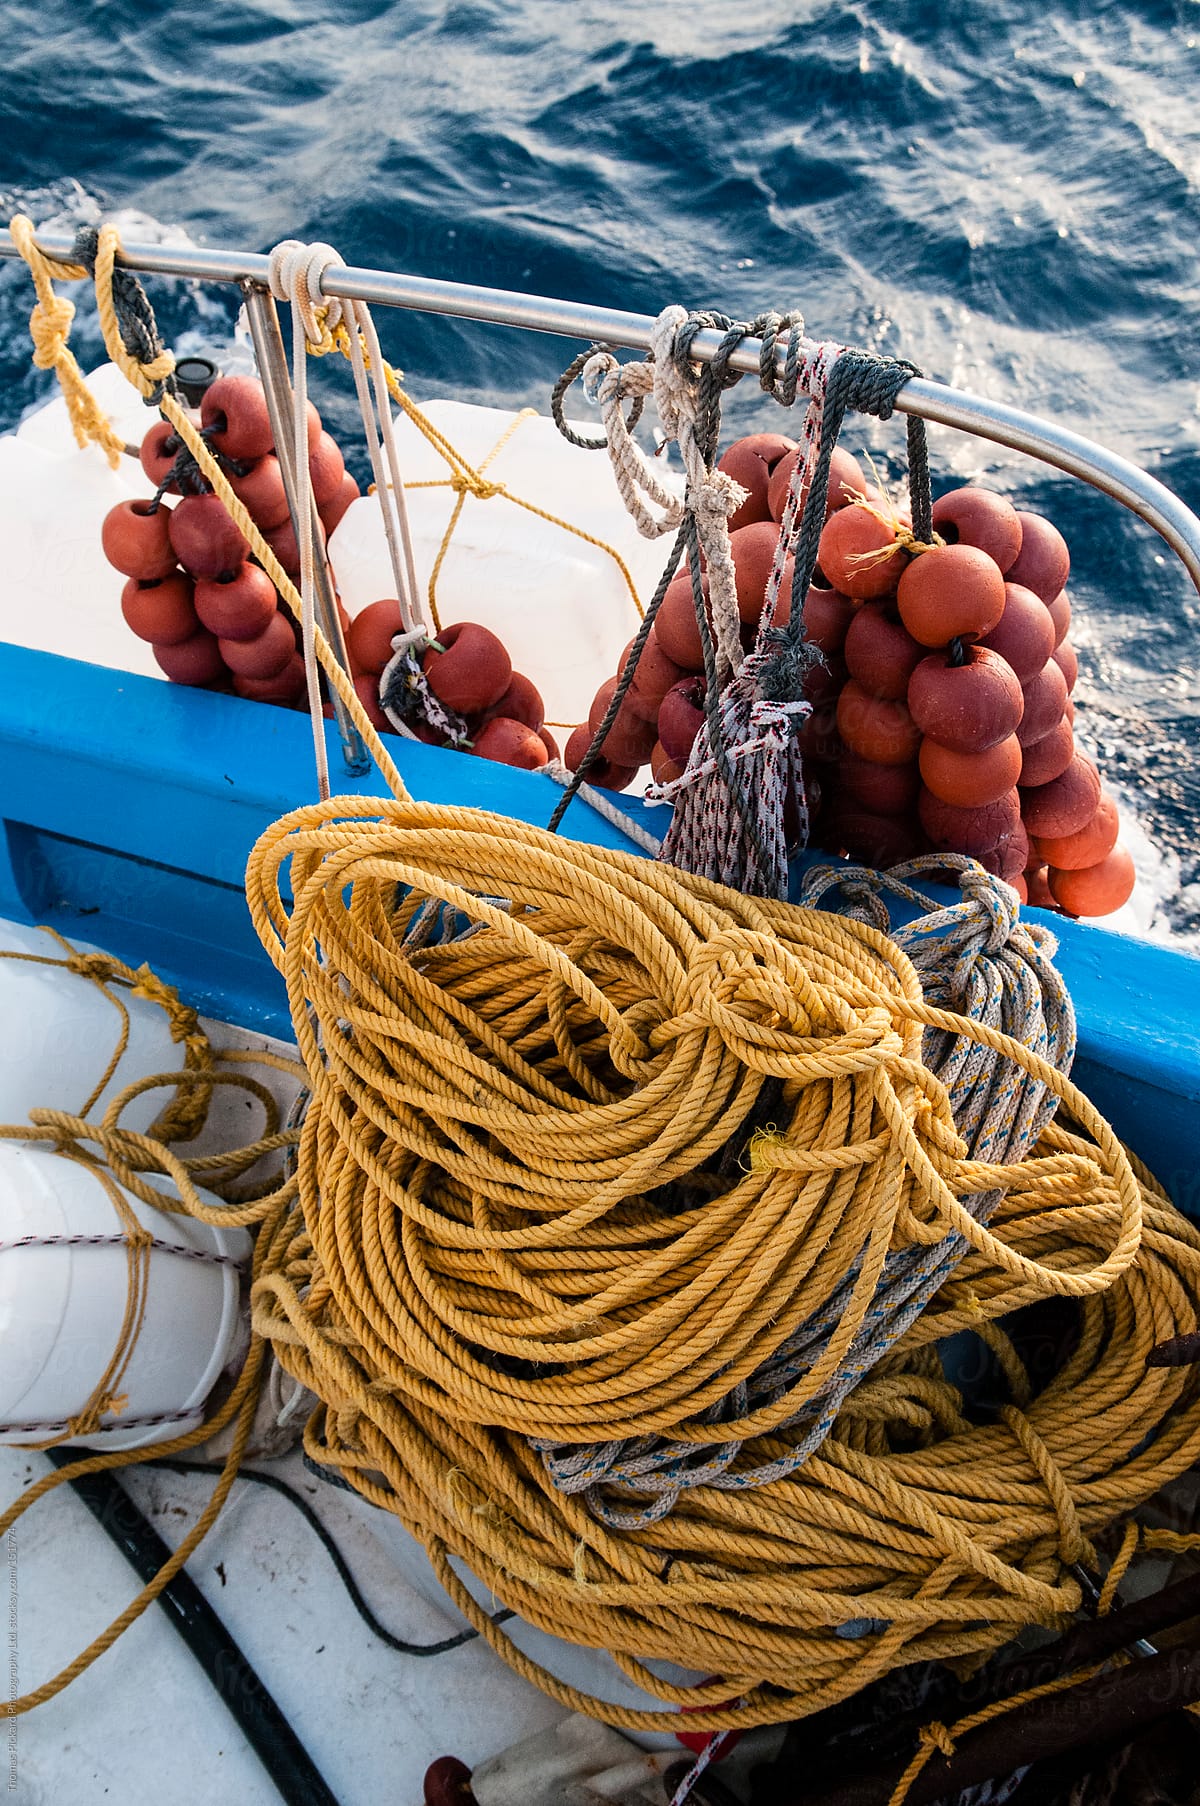 Gear on a commercial fishing boat, Fourni Islands, Greece.